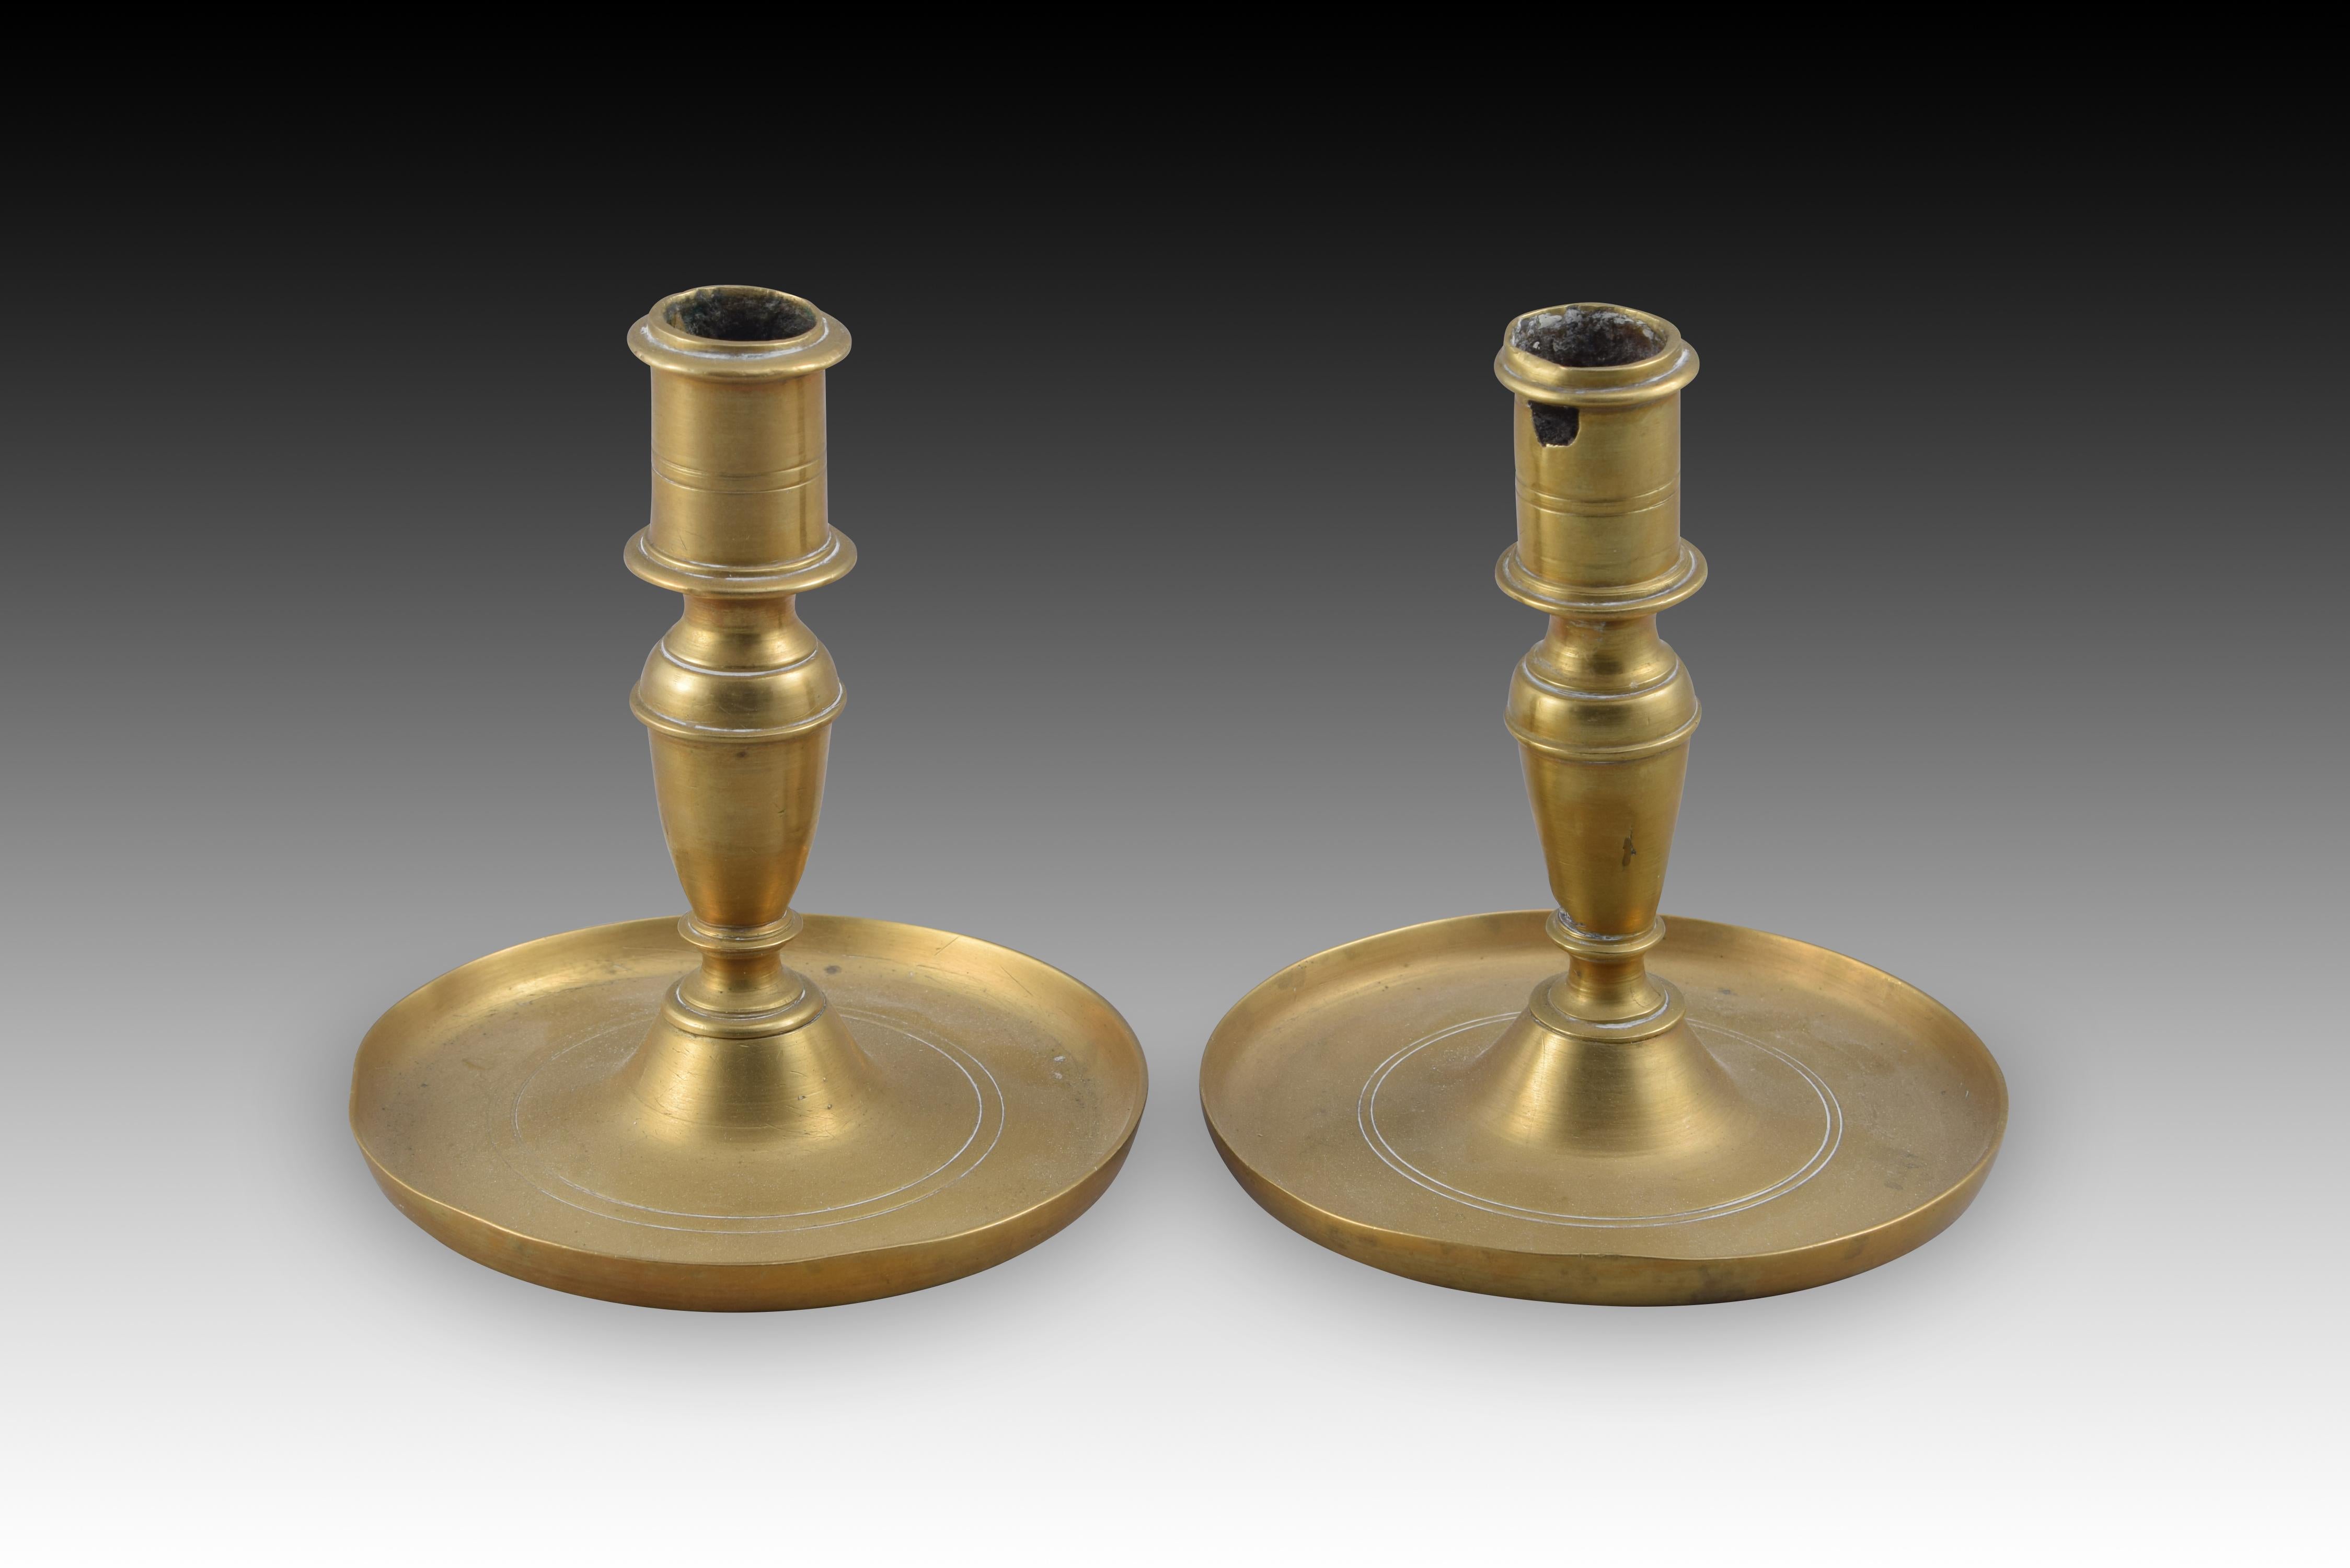 Pair of candlesticks. Bronze. XIX century. 
Pair of candlesticks with a circular base with a raised edge and decorated with two engraved lines, a vase-shaped
axis with fine smooth moldings and tubular lighters, decorated in a similar way to the